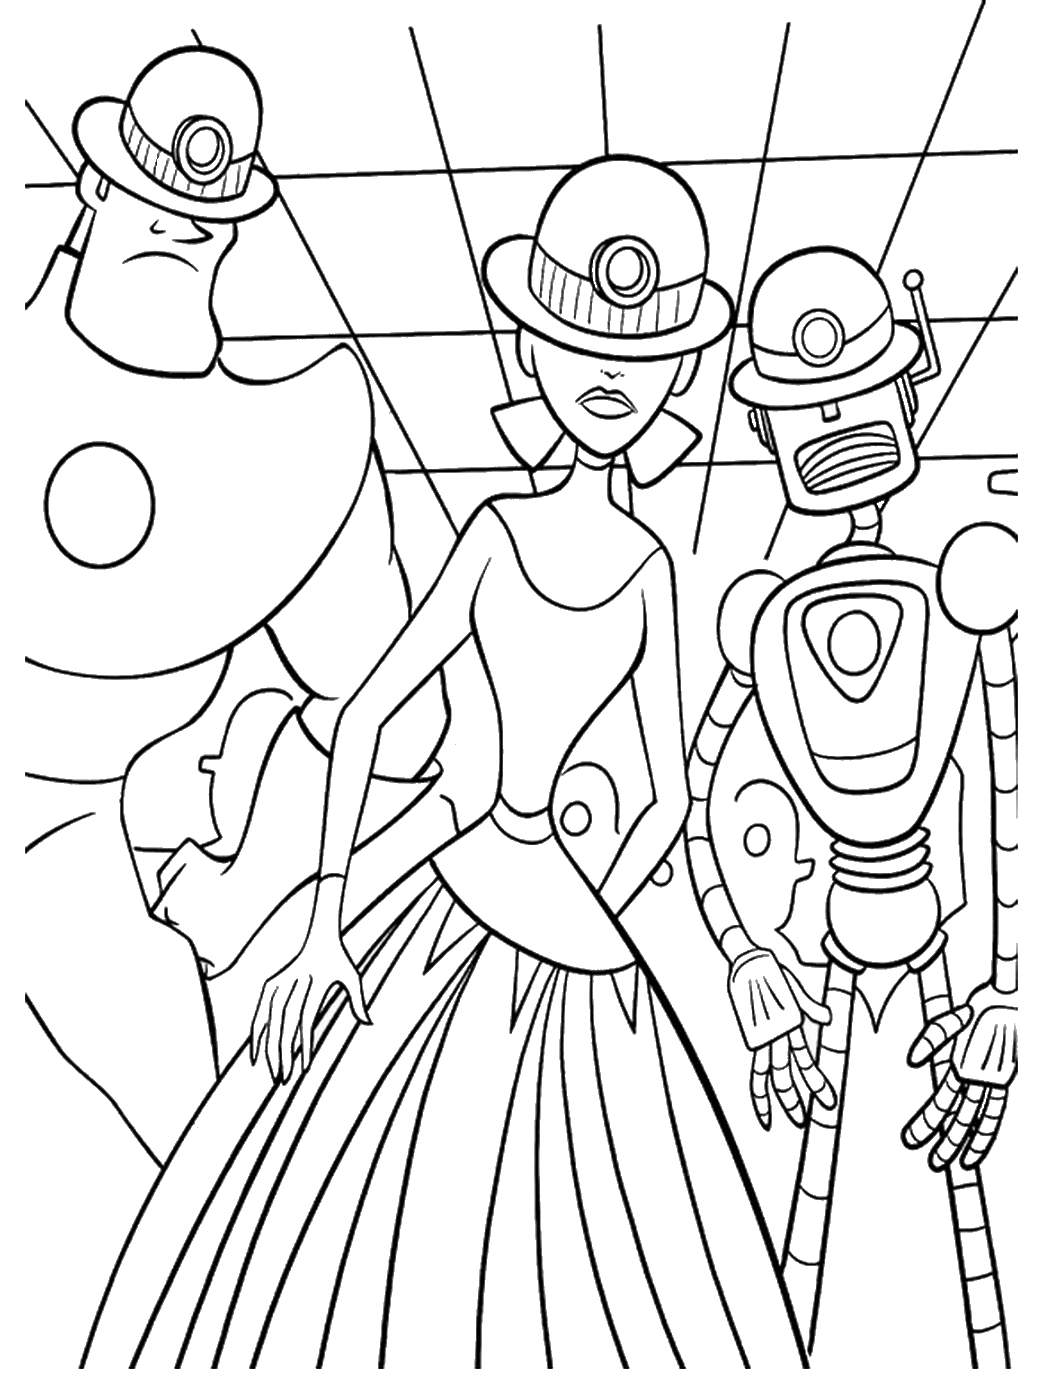 Meet the Robinsons Coloring Pages TV Film Printable 2020 04957 Coloring4free